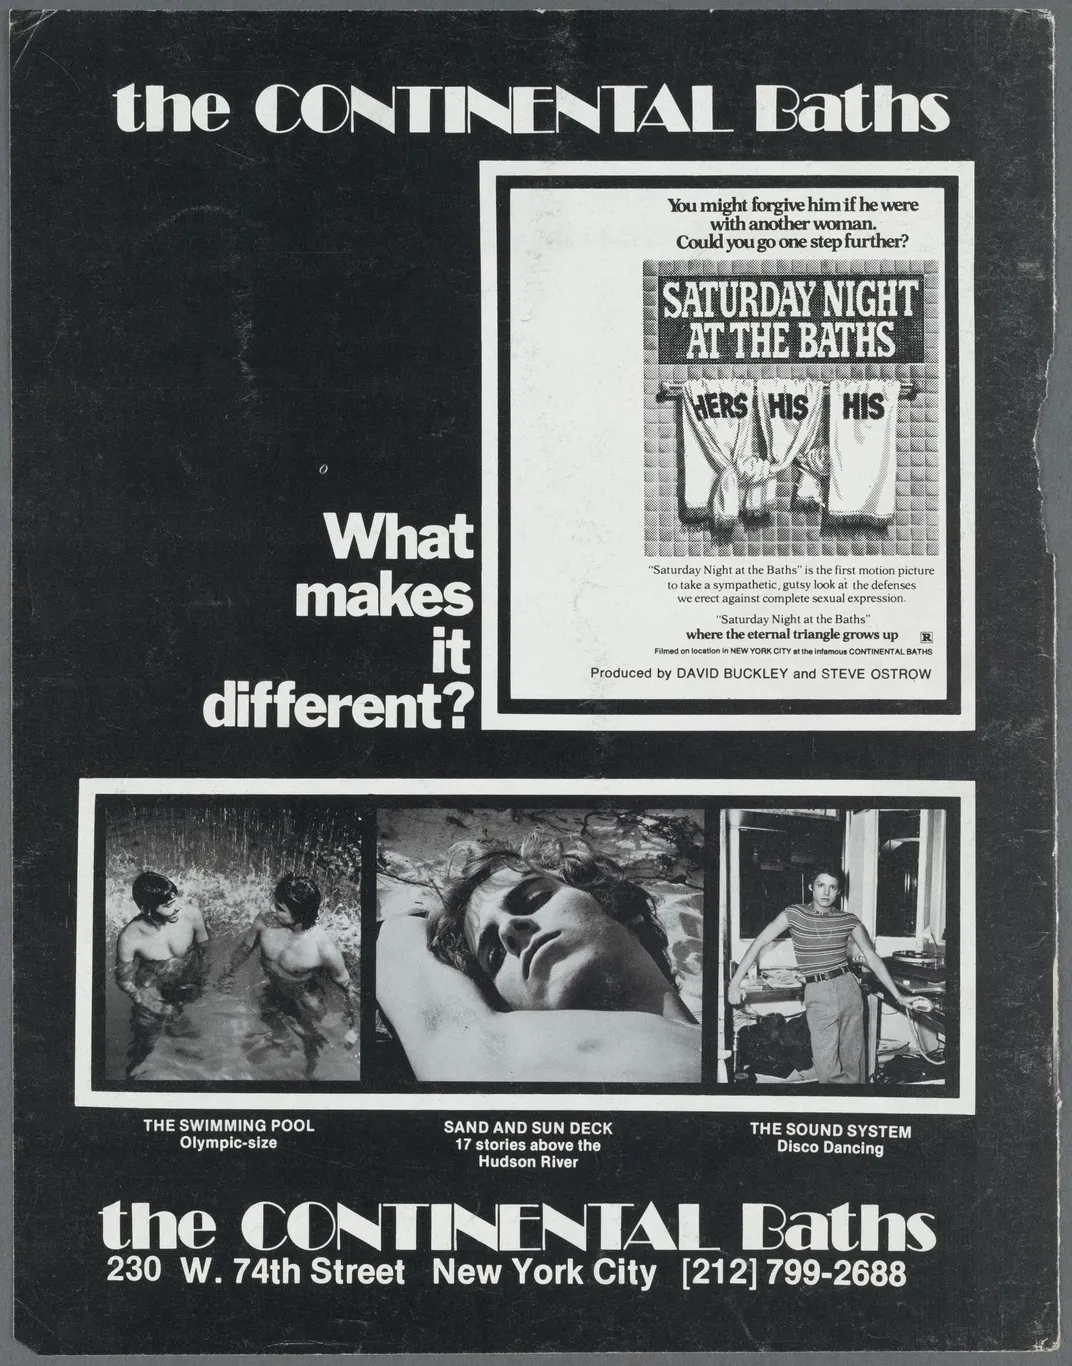 A 1975 advertisement for the Continental Baths